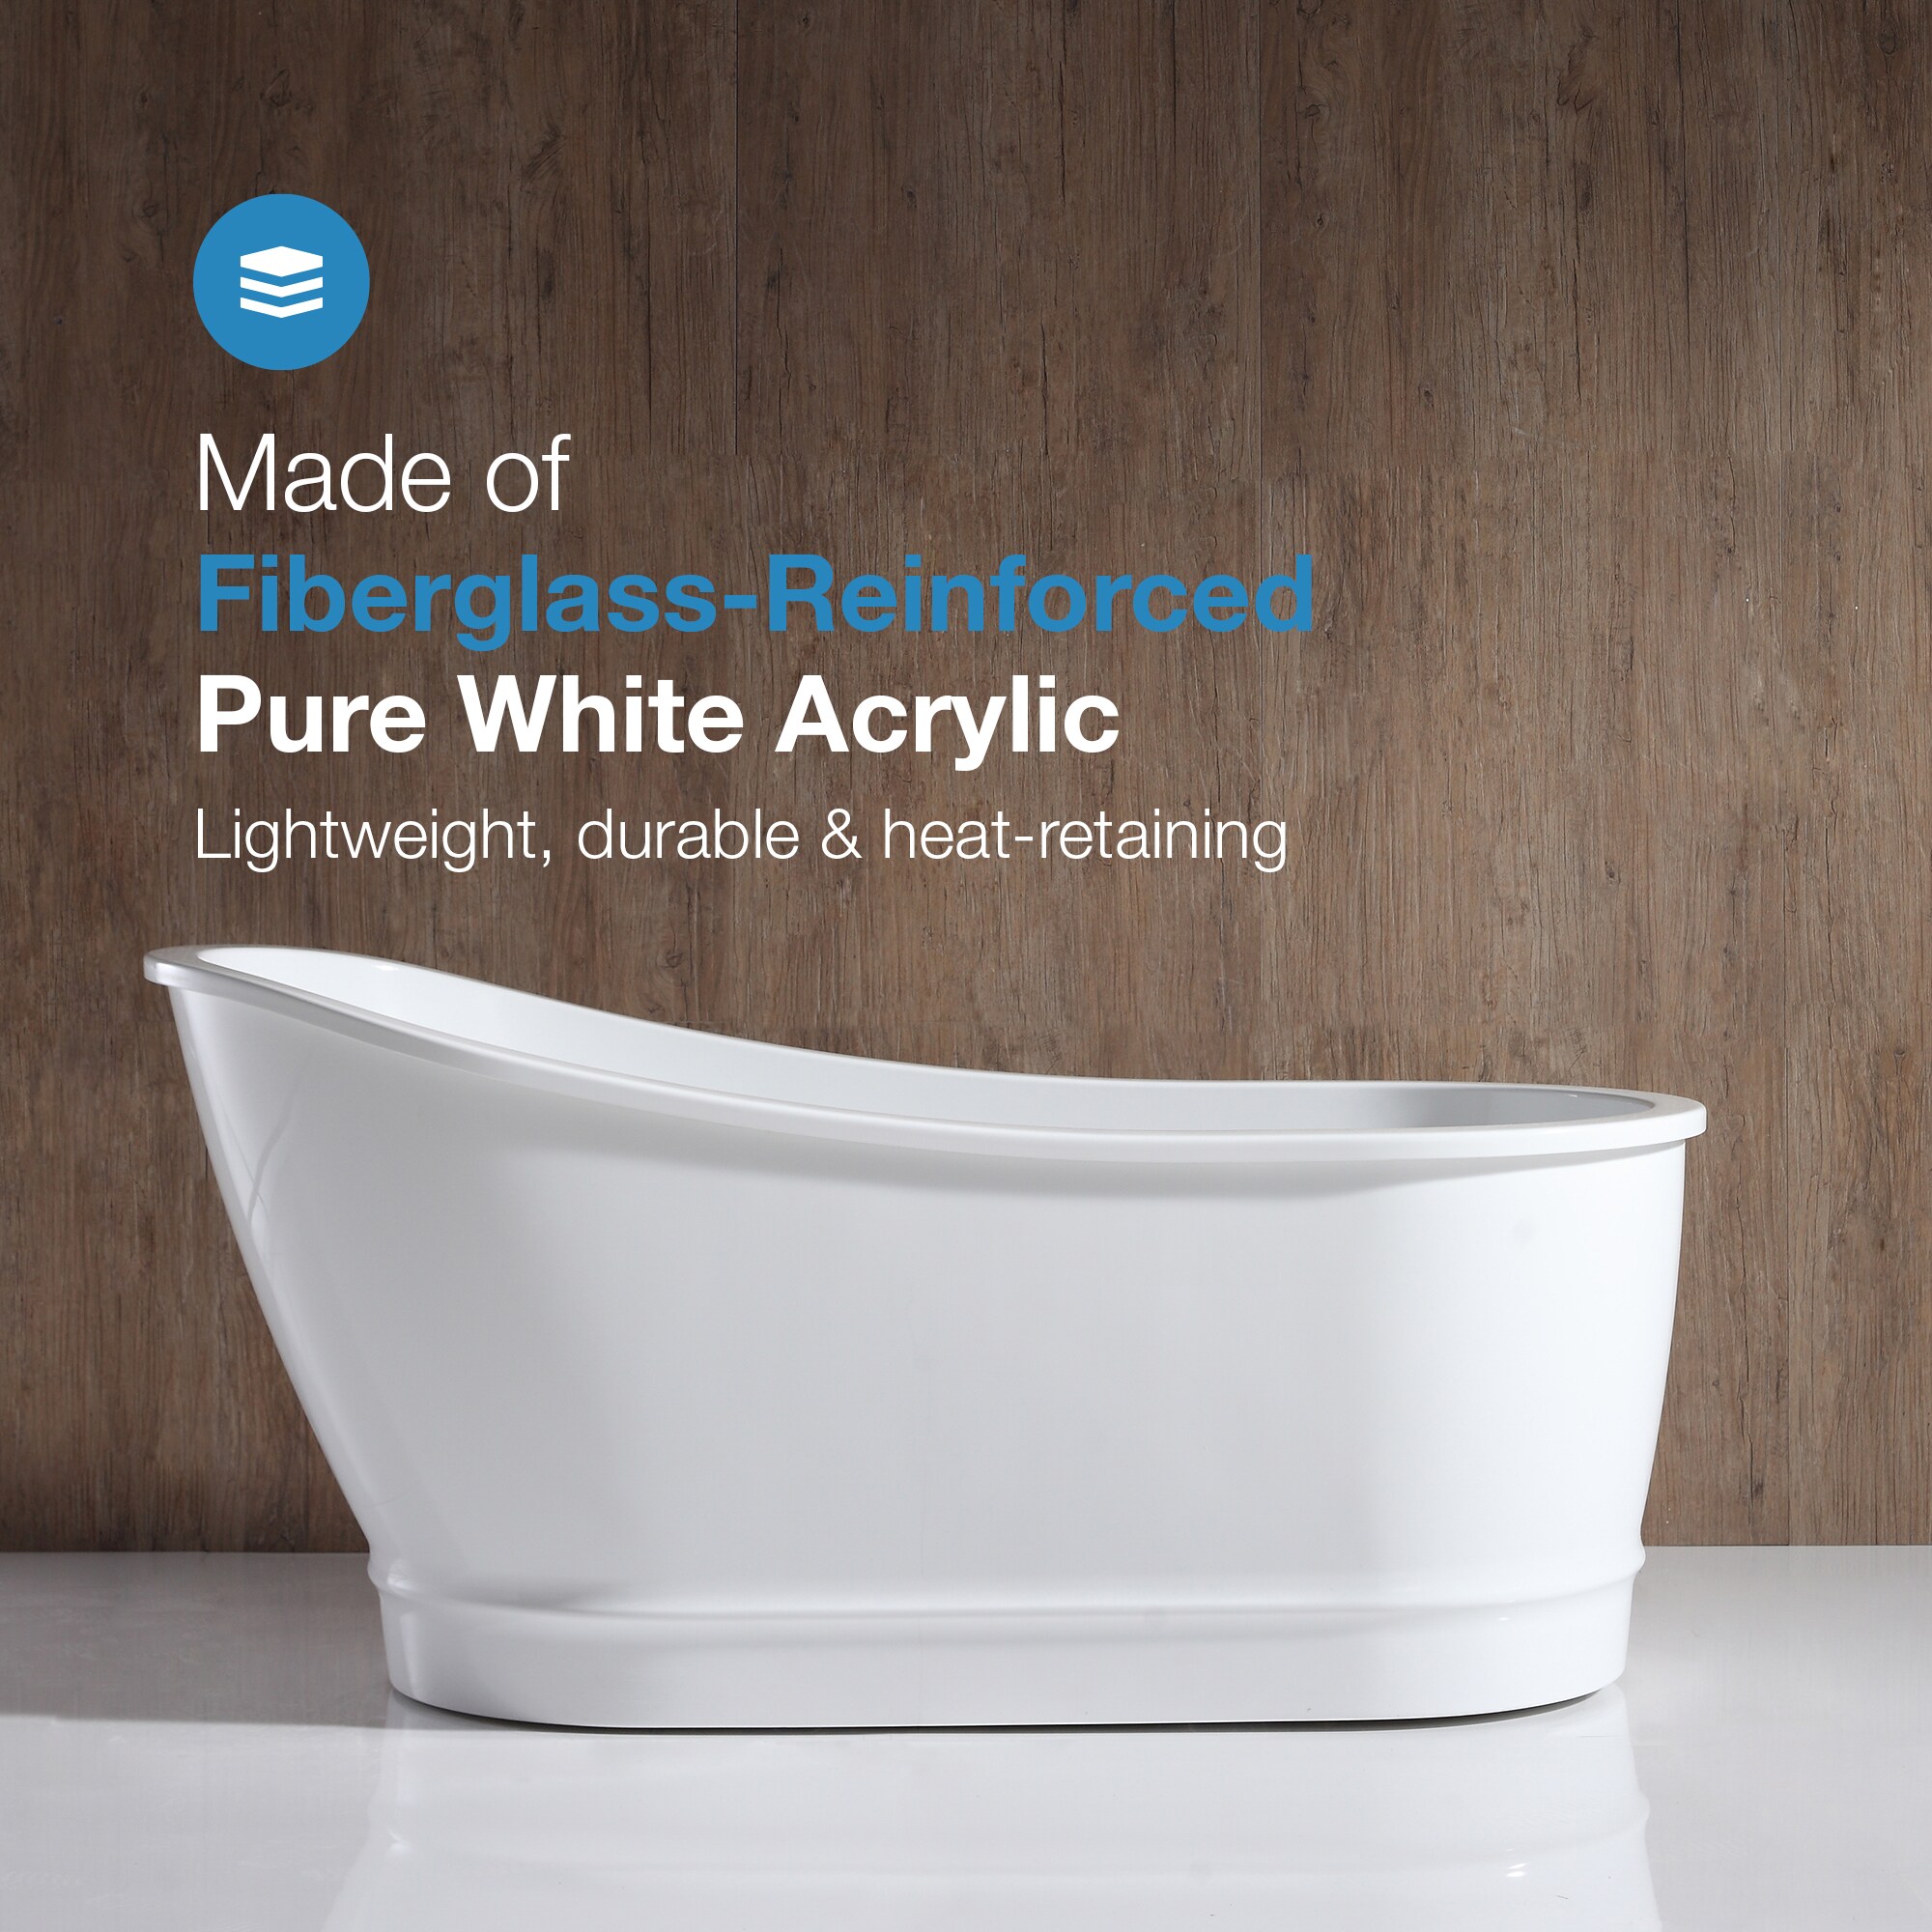 OVE Decors Carly 30.69-in W x 60.6-in L Gloss White Acrylic Oval Back Center Drain Freestanding Bathtub (Drain Included) in the Bathtubs at Lowes.com